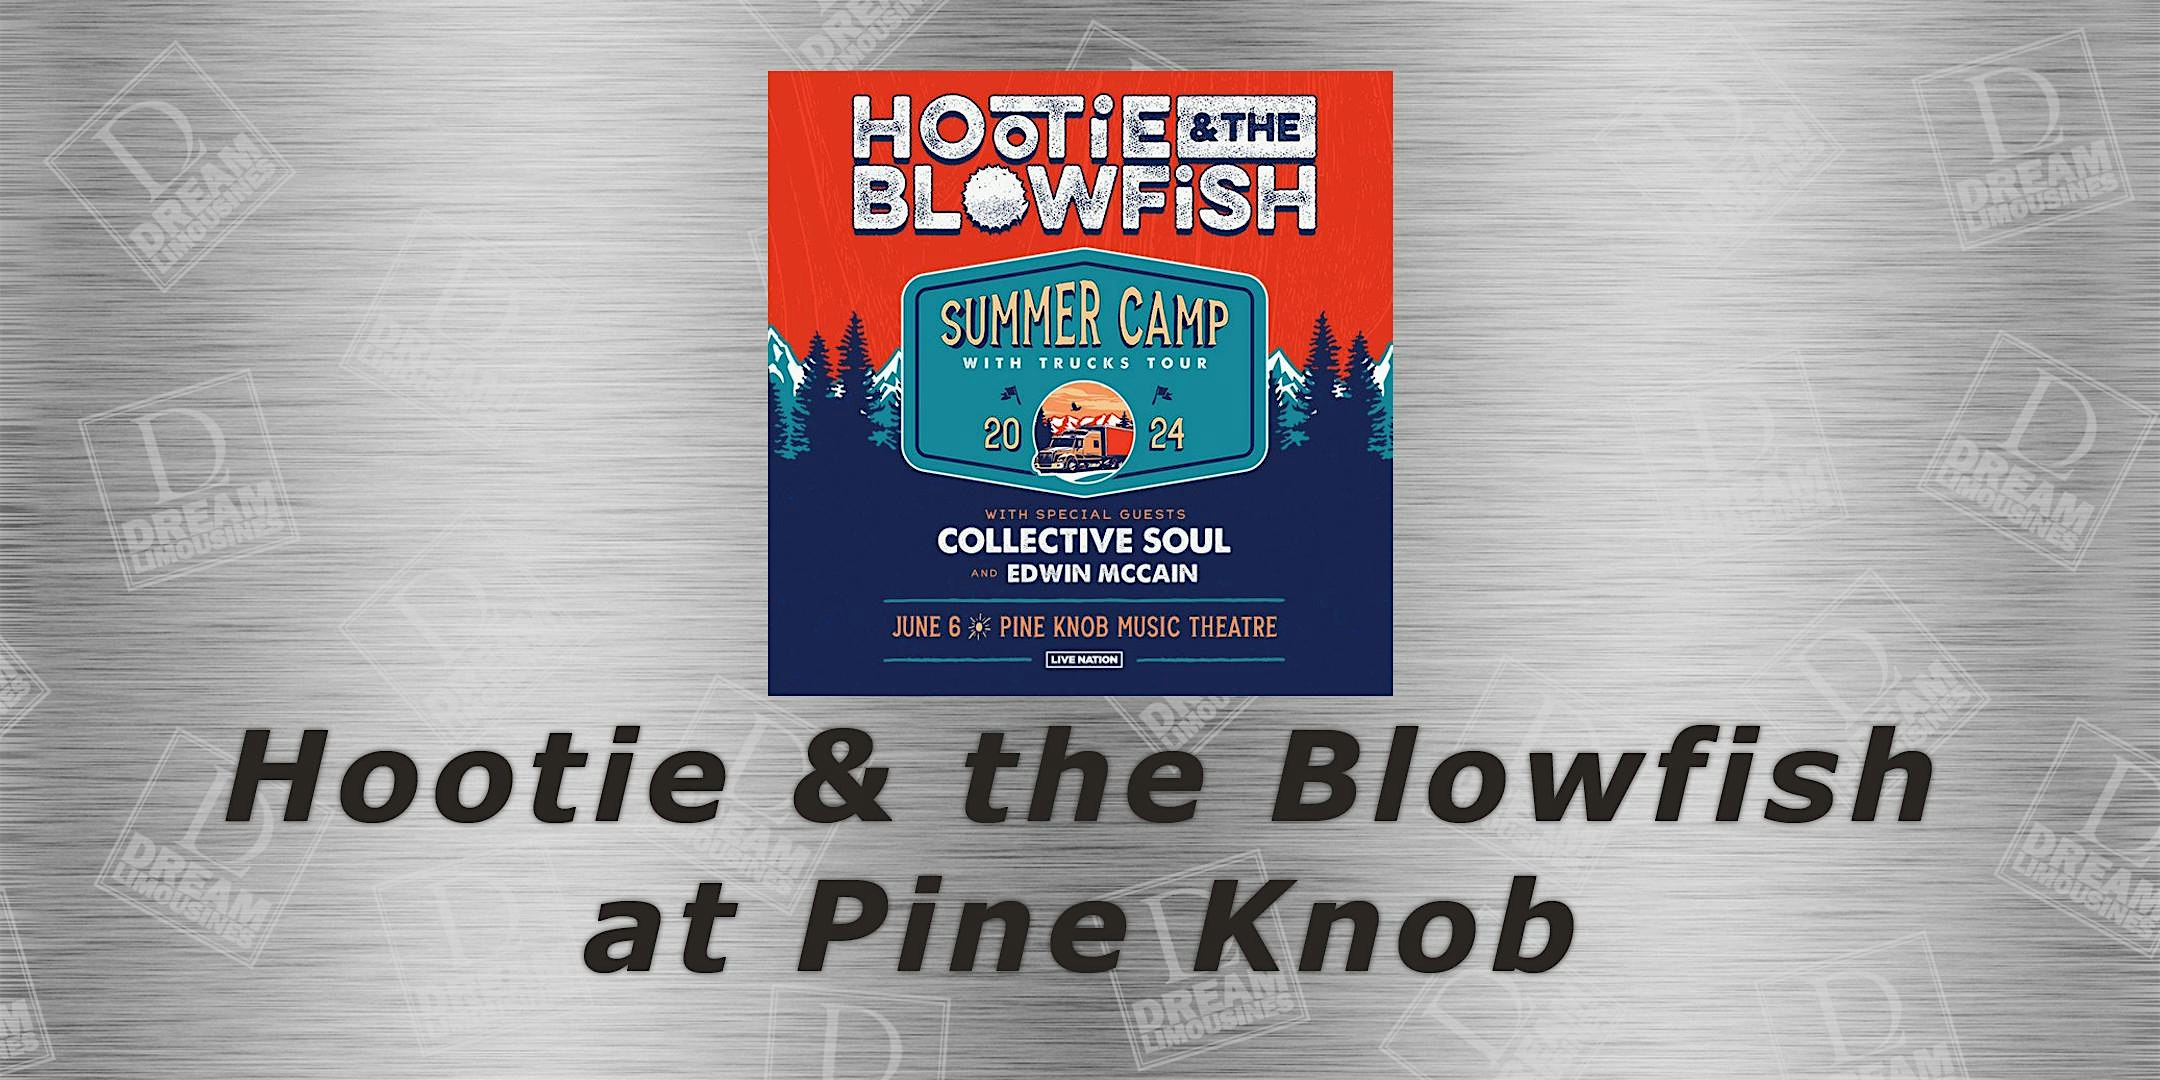 Shuttle Bus to See Hootie & the Blowfish at Pine Knob Music Theatre